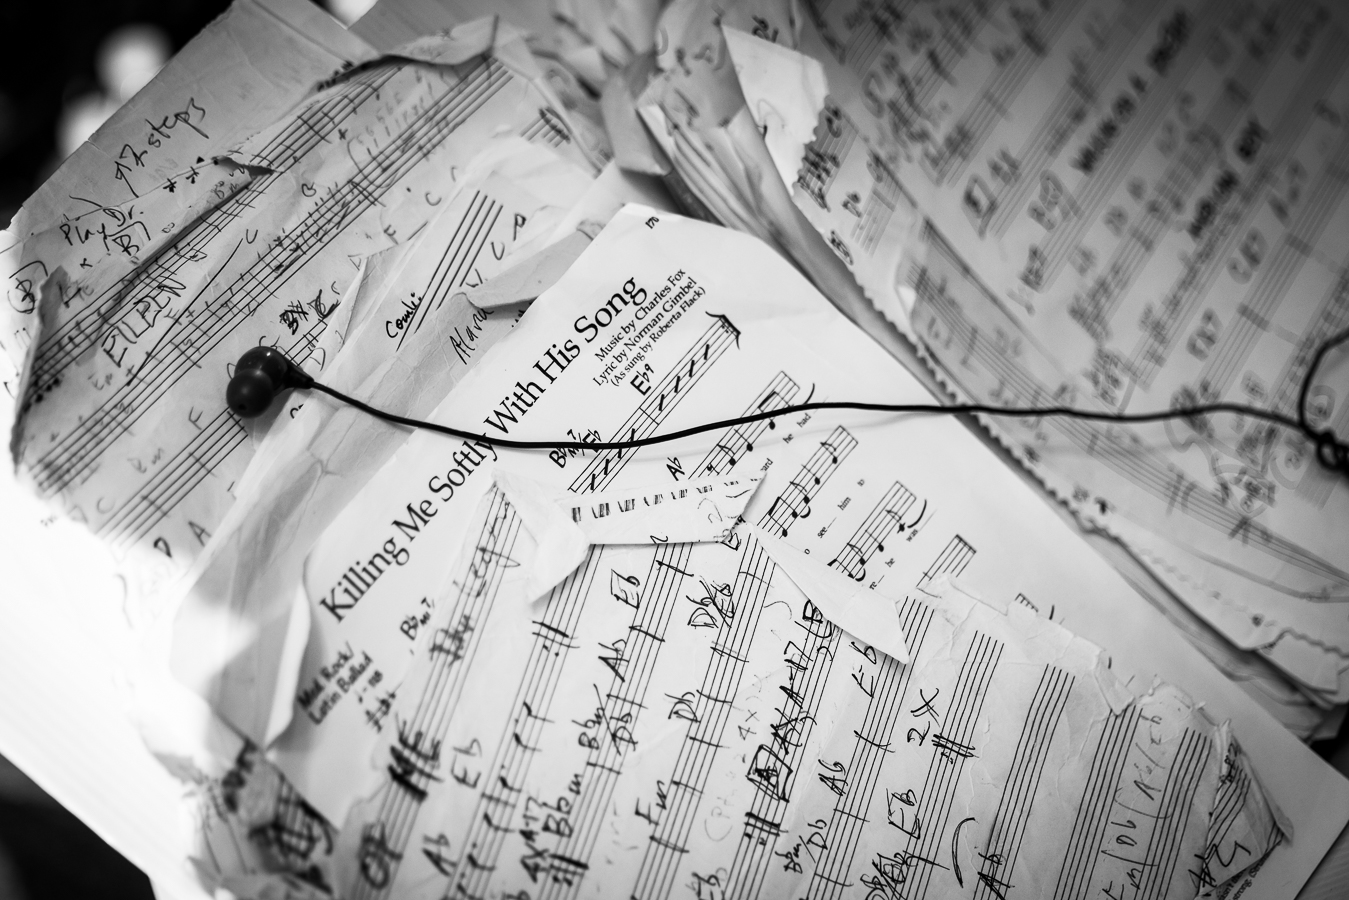 black and white image of music sheets with handwritten notes on them 